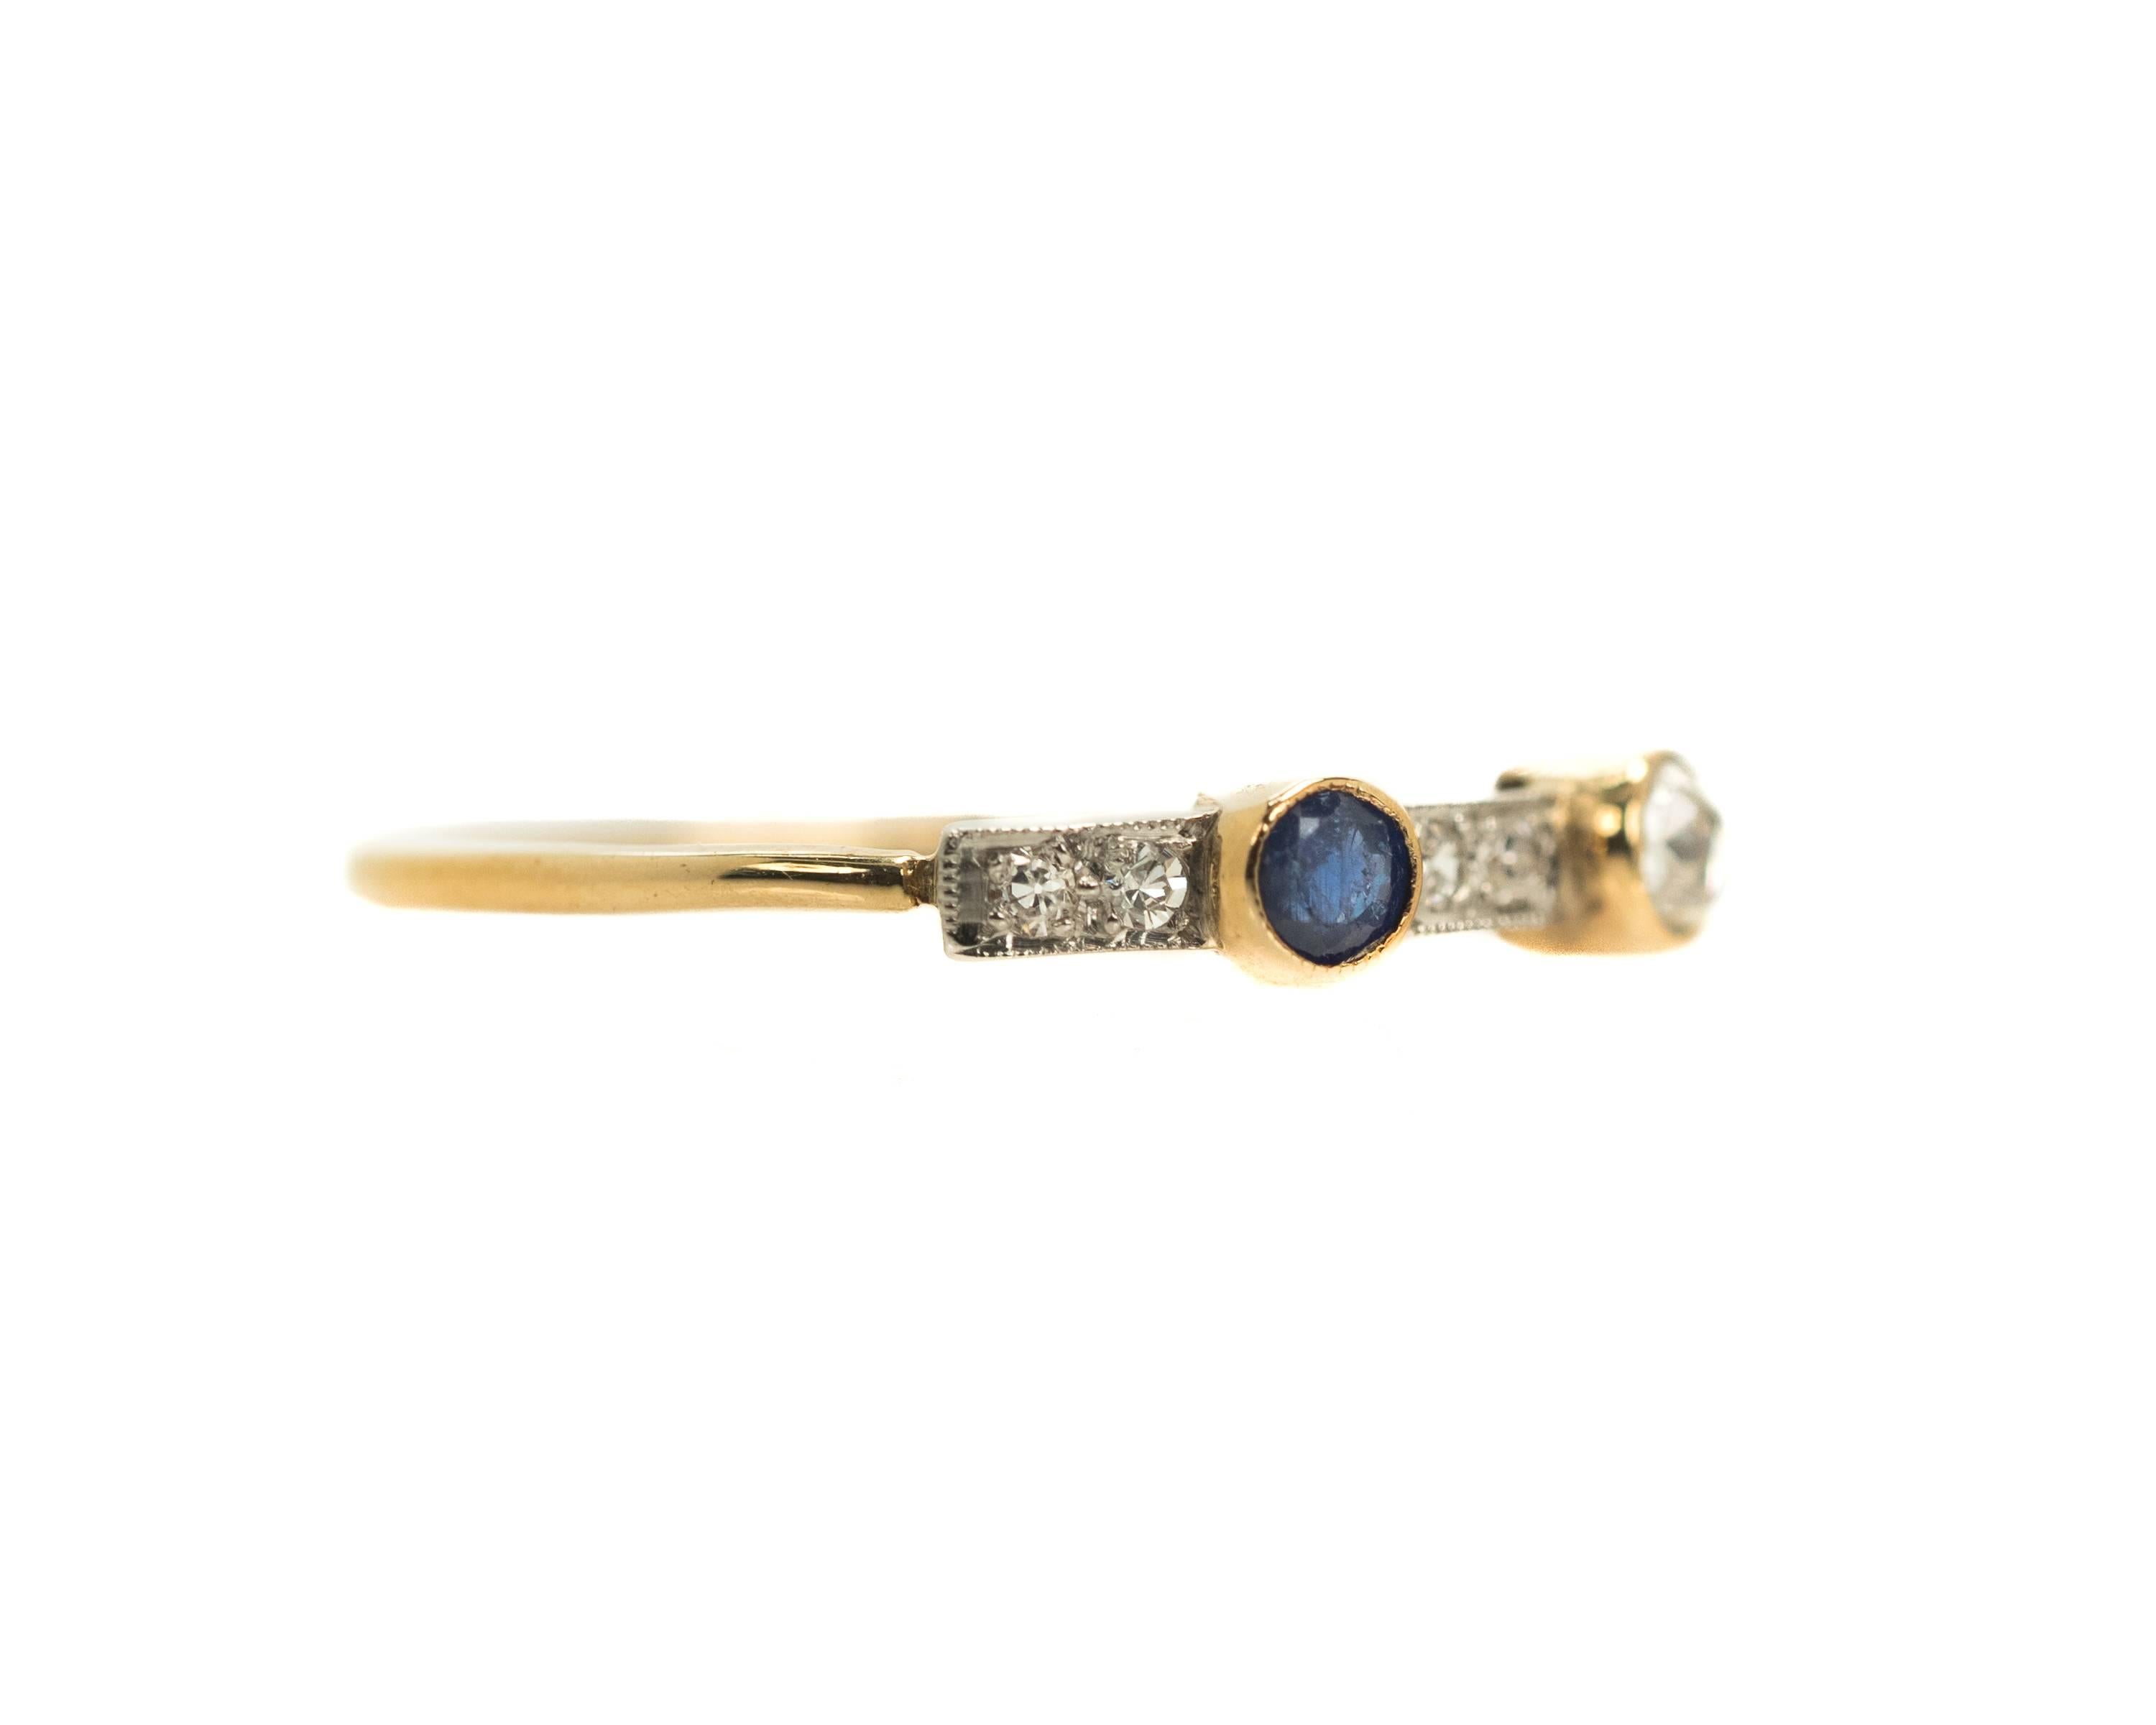 Stackable Diamond, Sapphire and 14 Karat Two-Tone Gold Gemstone Ring 

This Stackable Ring features a Blue Sapphire set in 14K Yellow Gold and a Champagne Diamond set in 14K White Gold. The shank is crafted from 14K Yellow Gold. The rich yellow Gold